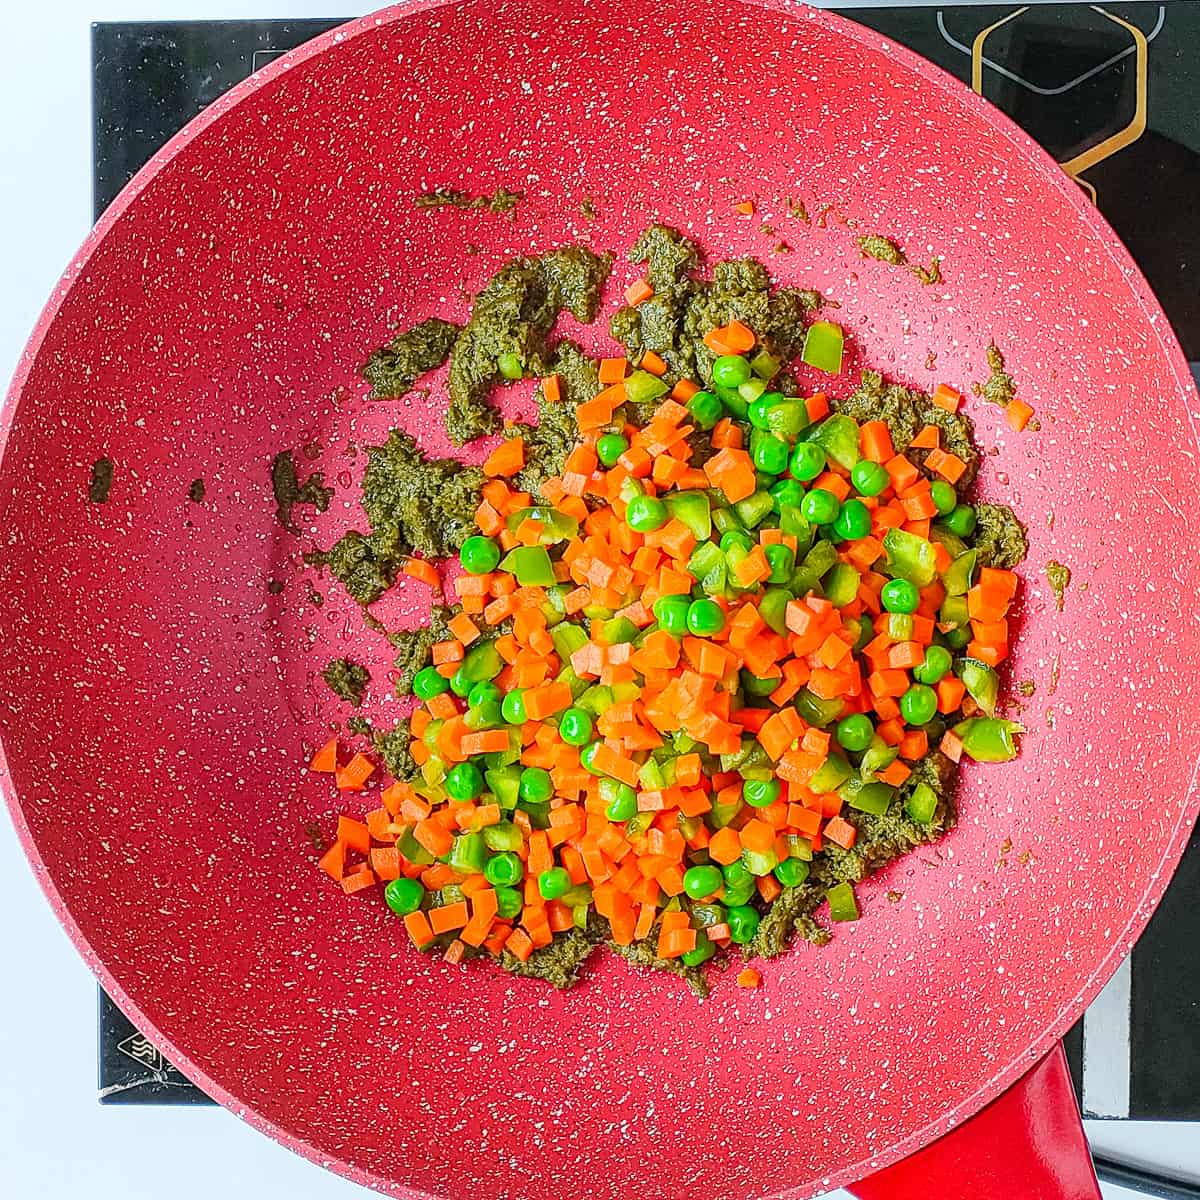 Mixed vegetables being cooked in a wok pan.